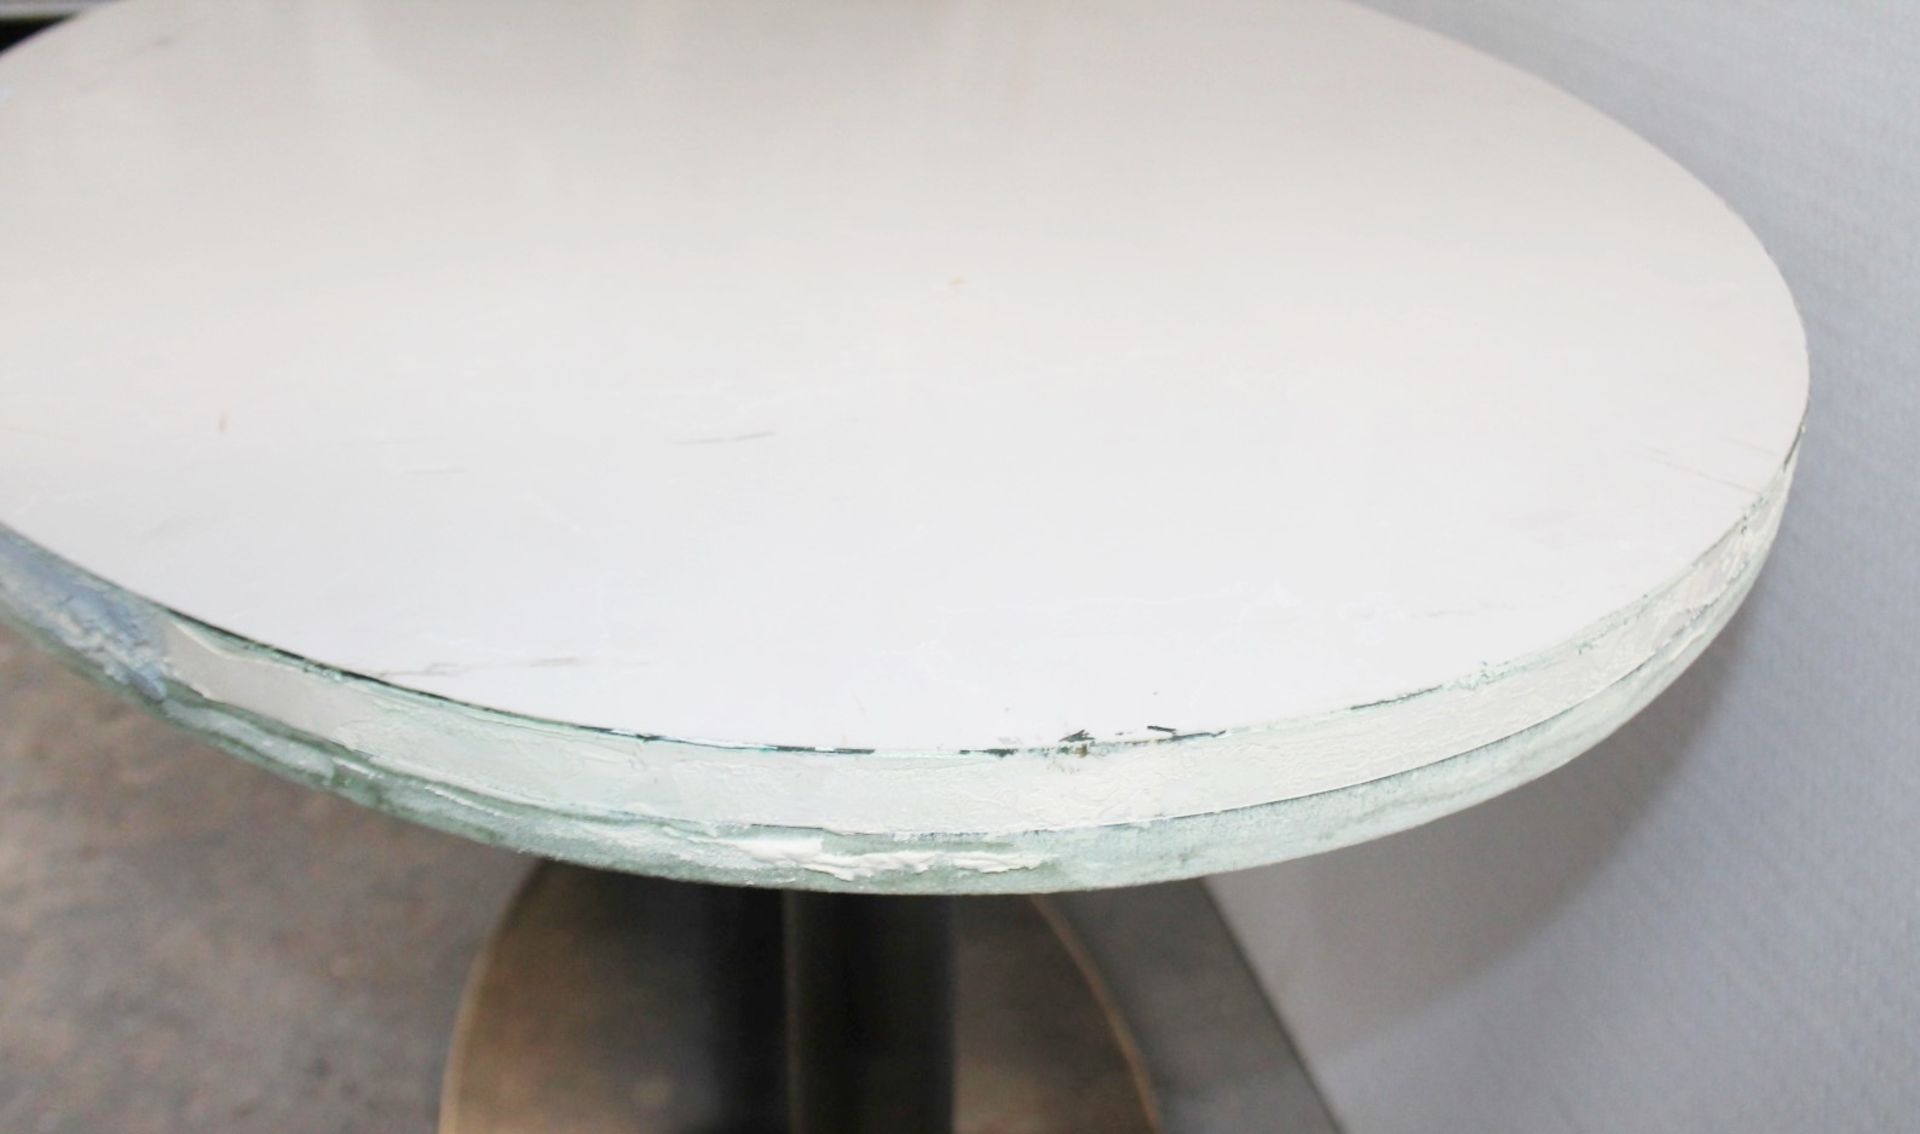 A Pair Of Oval Commercial Bistro Tables With A Brass Trim And Sturdy Metal Bases *Read Description* - Image 7 of 7